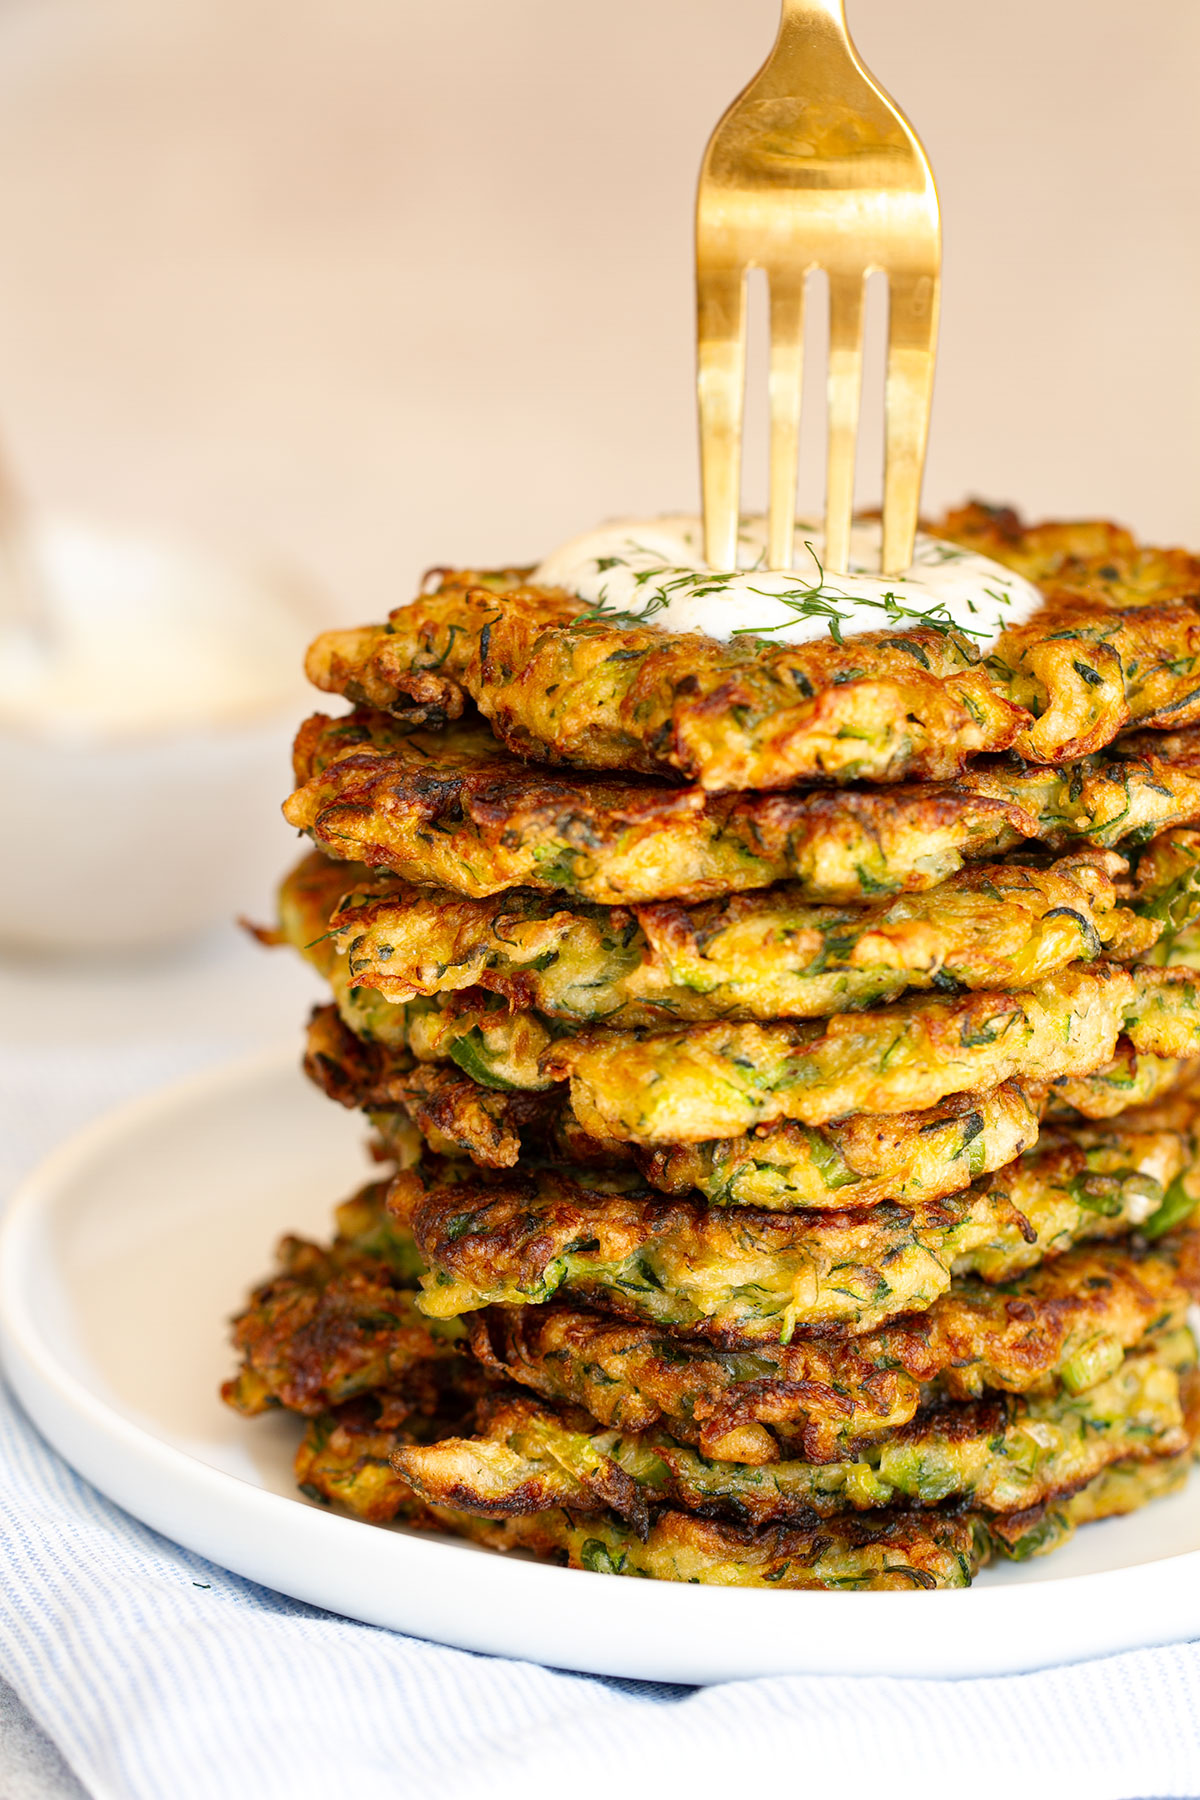 The cooked zucchini pancakes on a white plate.